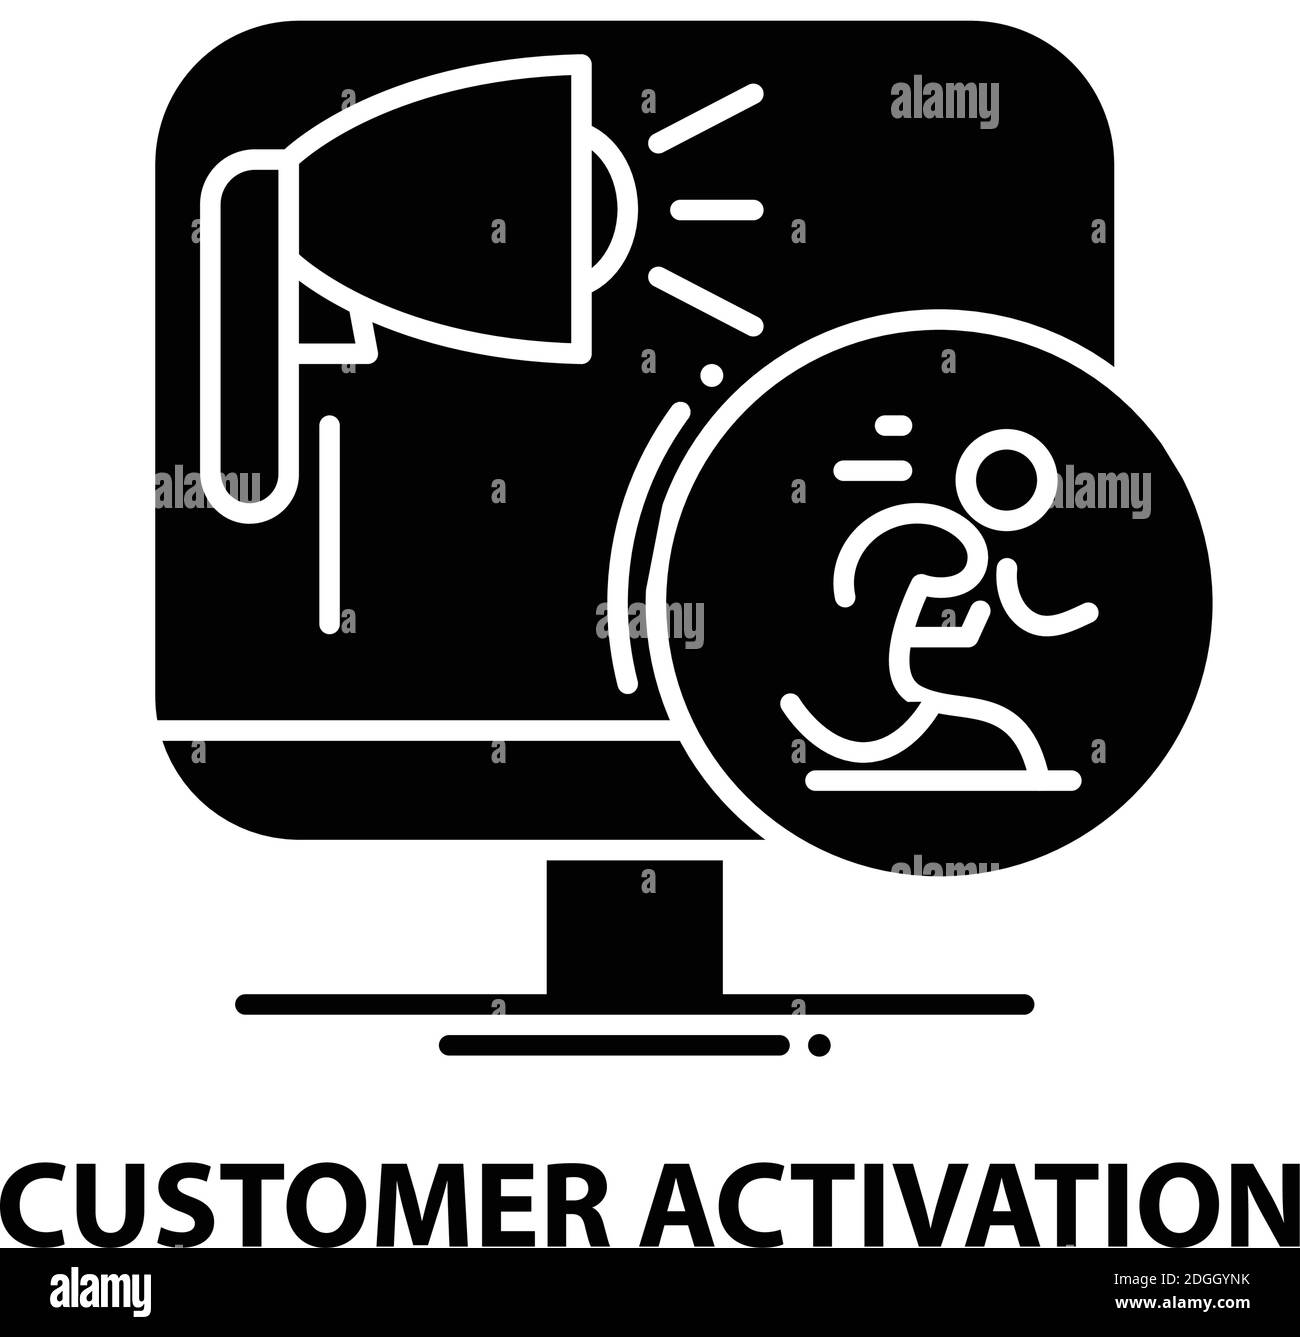 customer activation icon, black vector sign with editable strokes, concept illustration Stock Vector